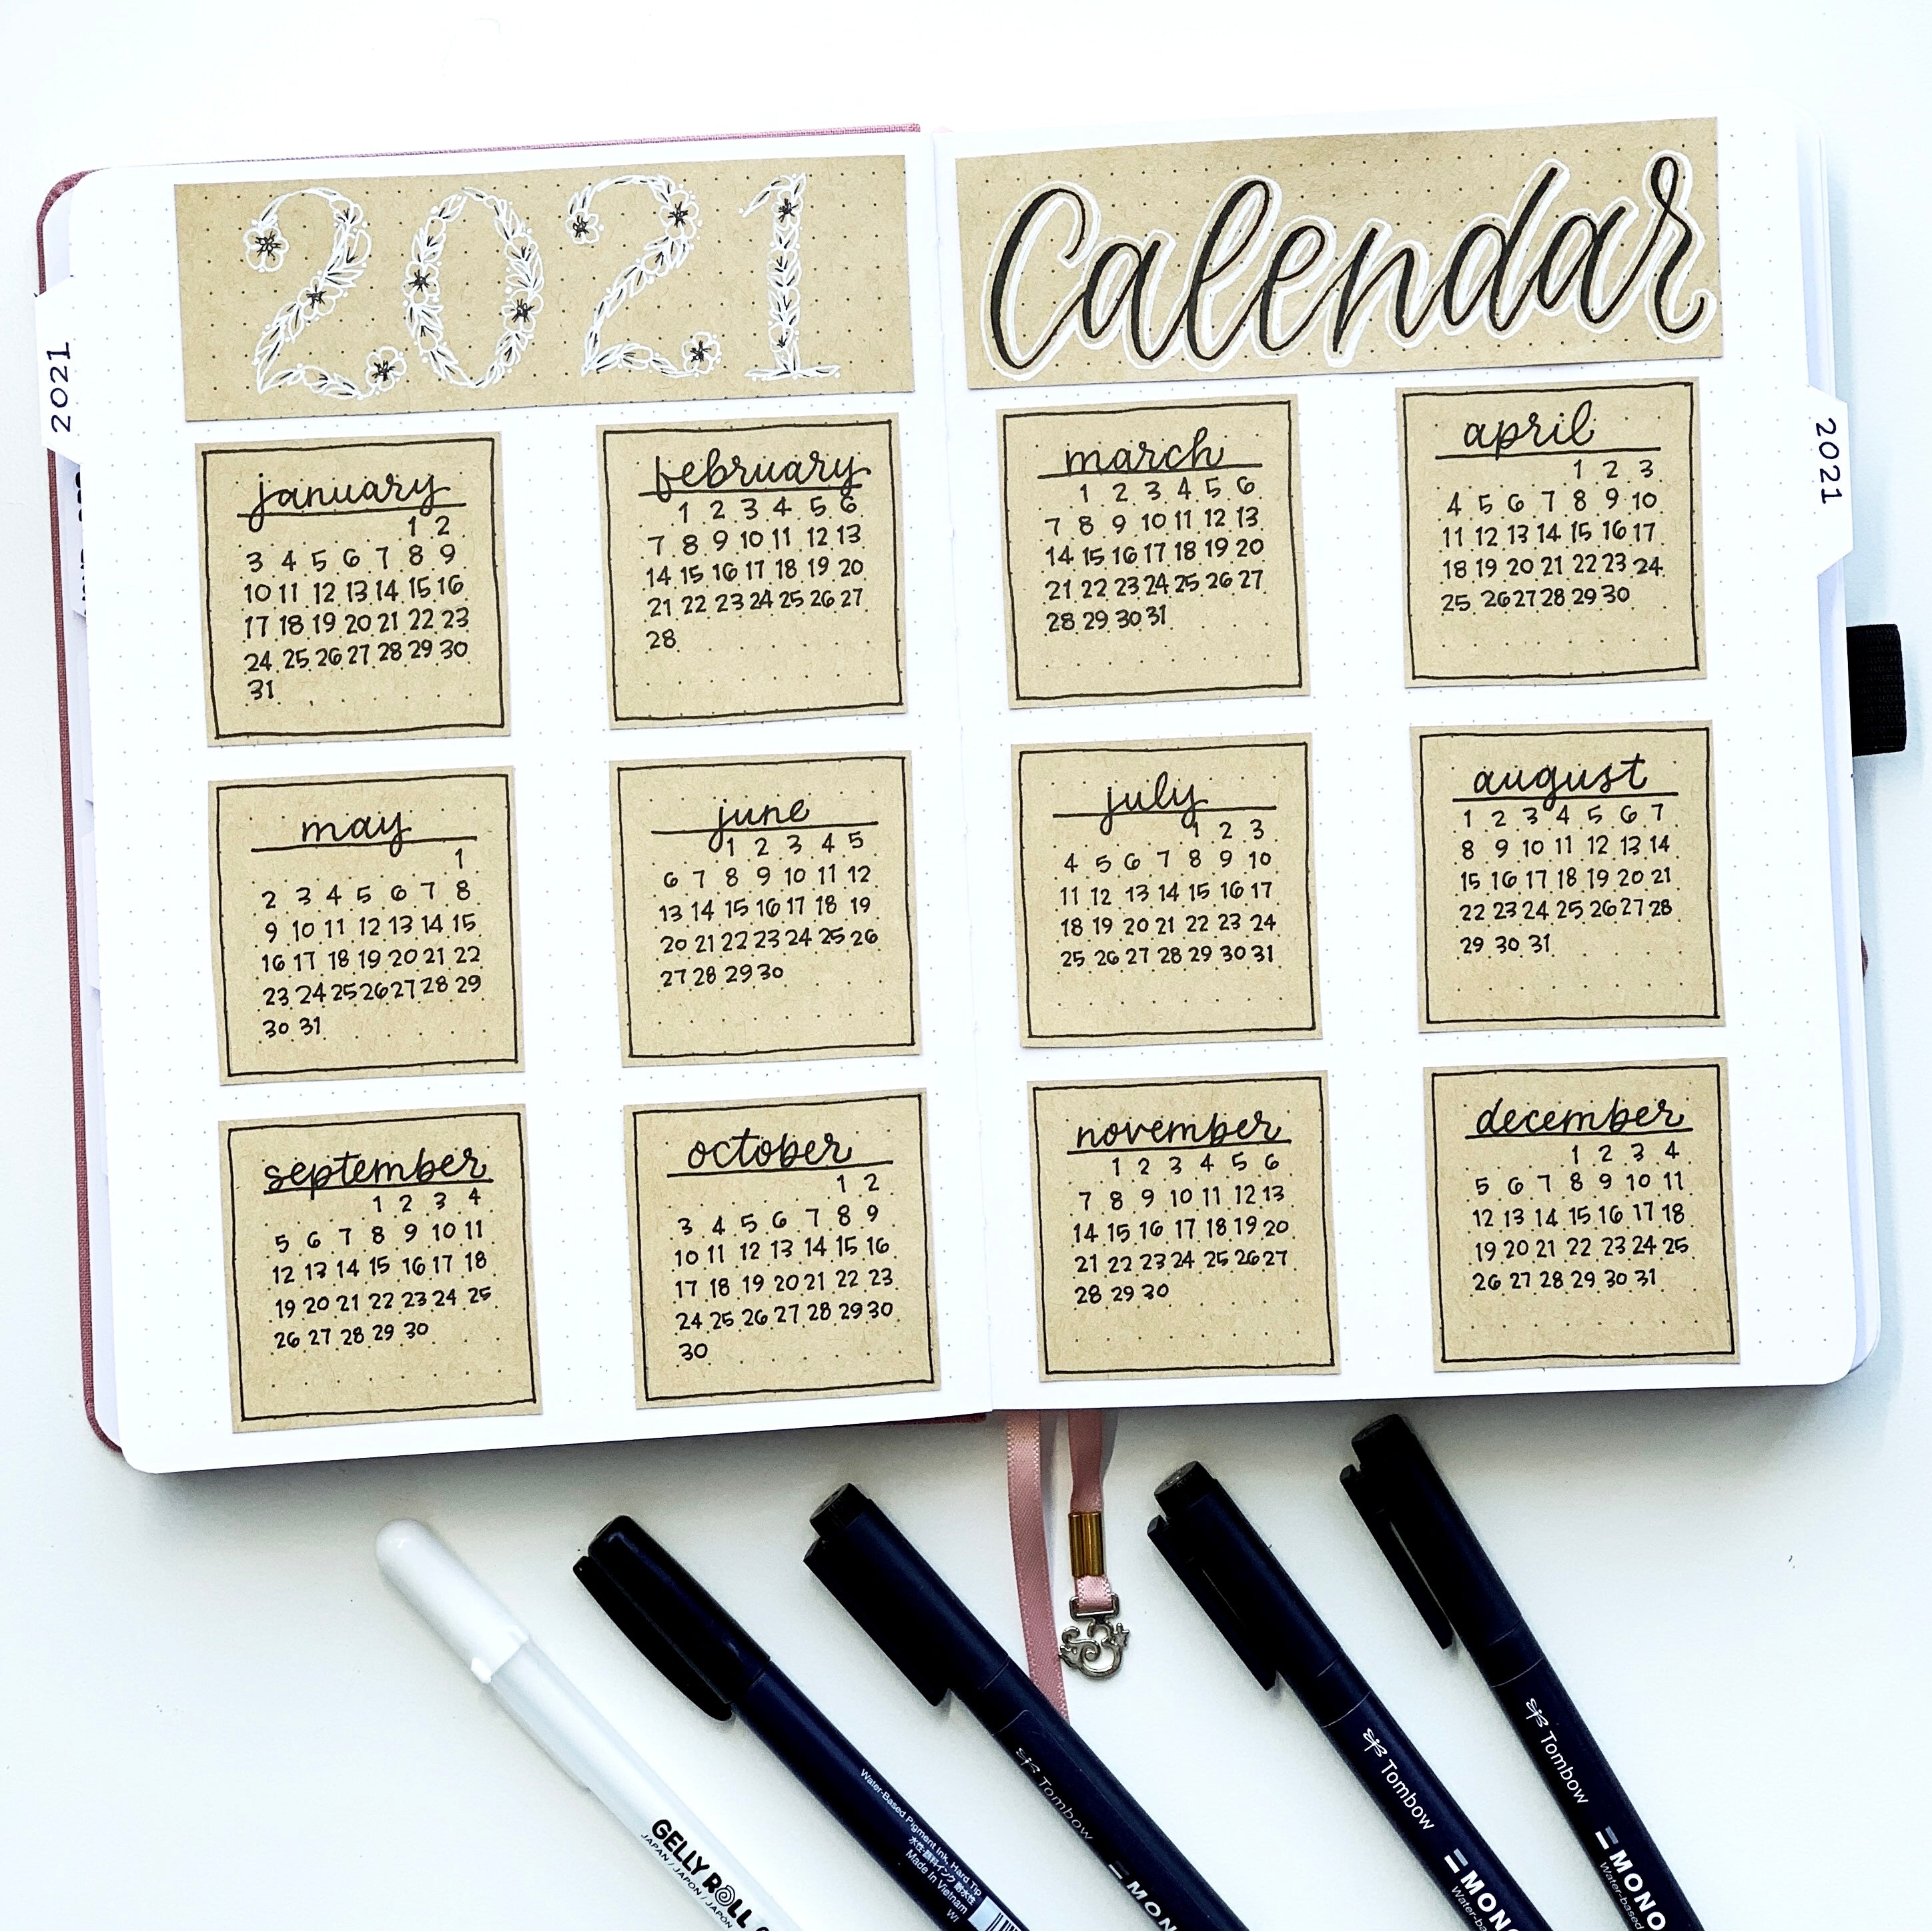 Learn how to create this 2021 Yearly Calendar in your bullet journal with Adrienne from @studio80design!